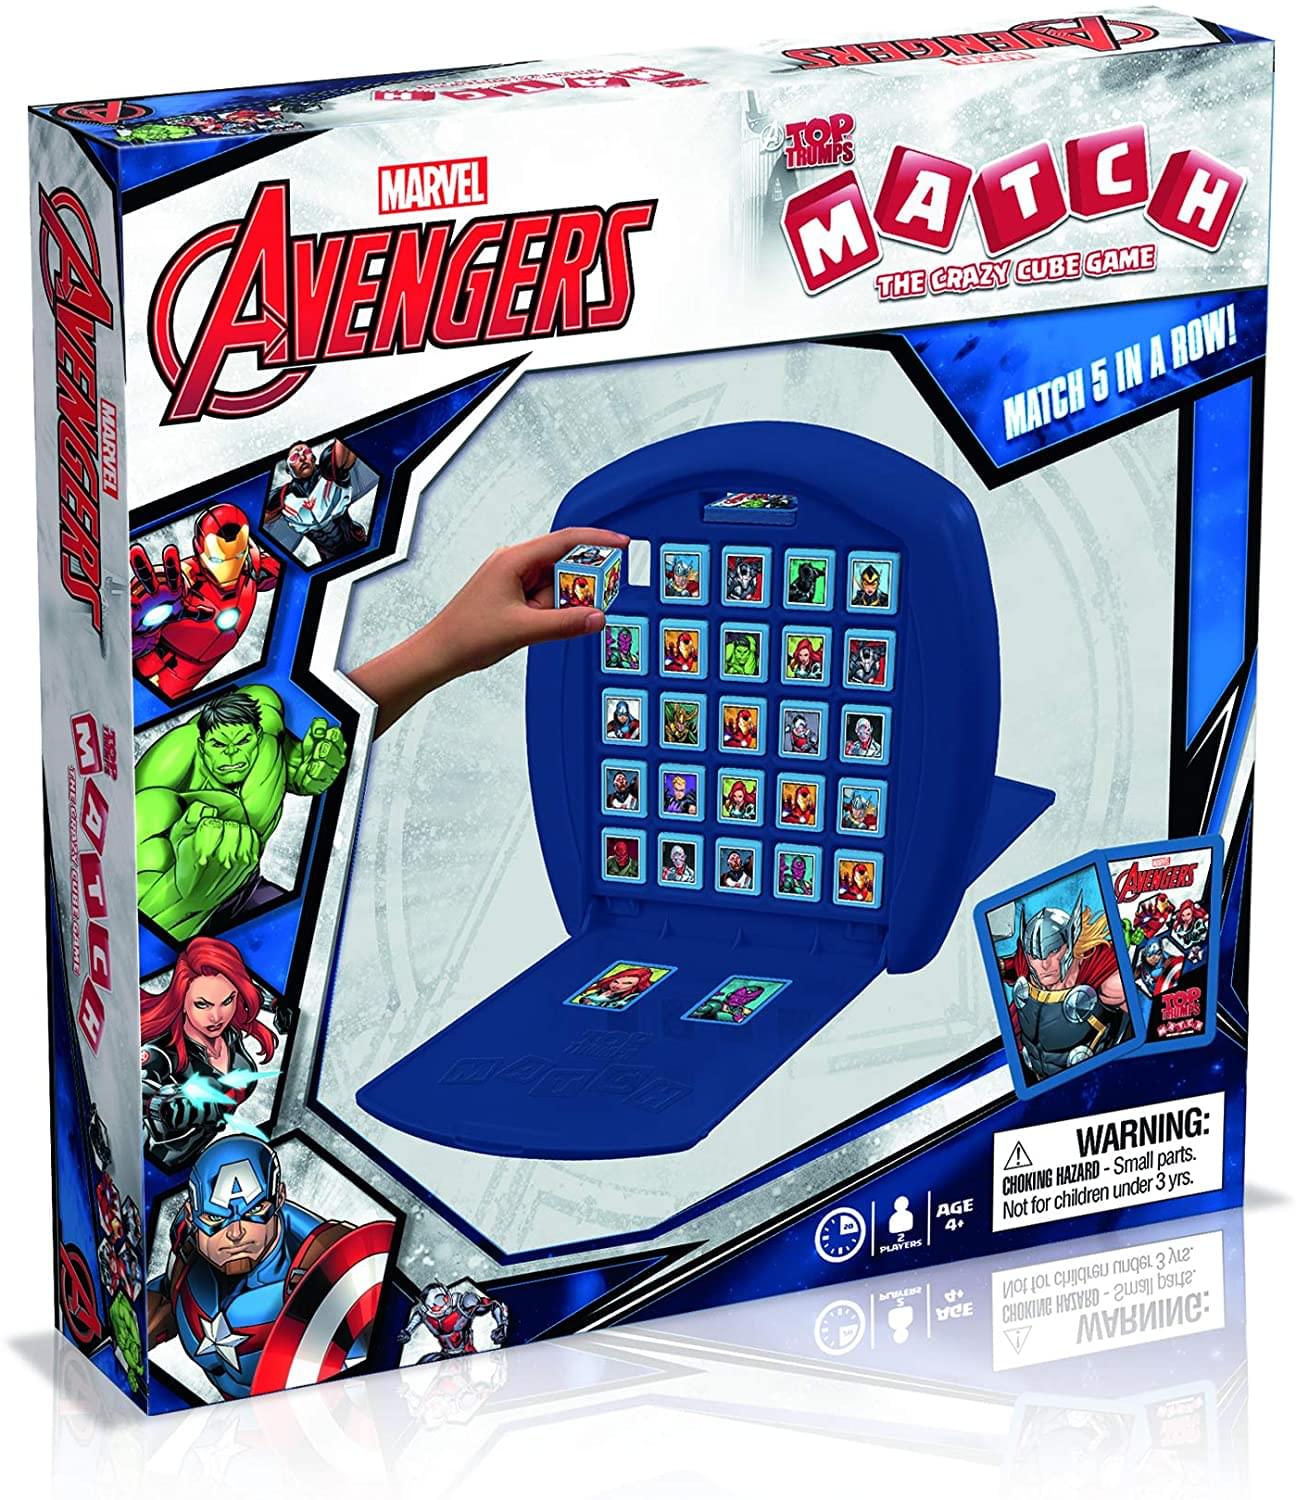 Marvel Avengers Top Trumps Match | The Crazy Cube Game